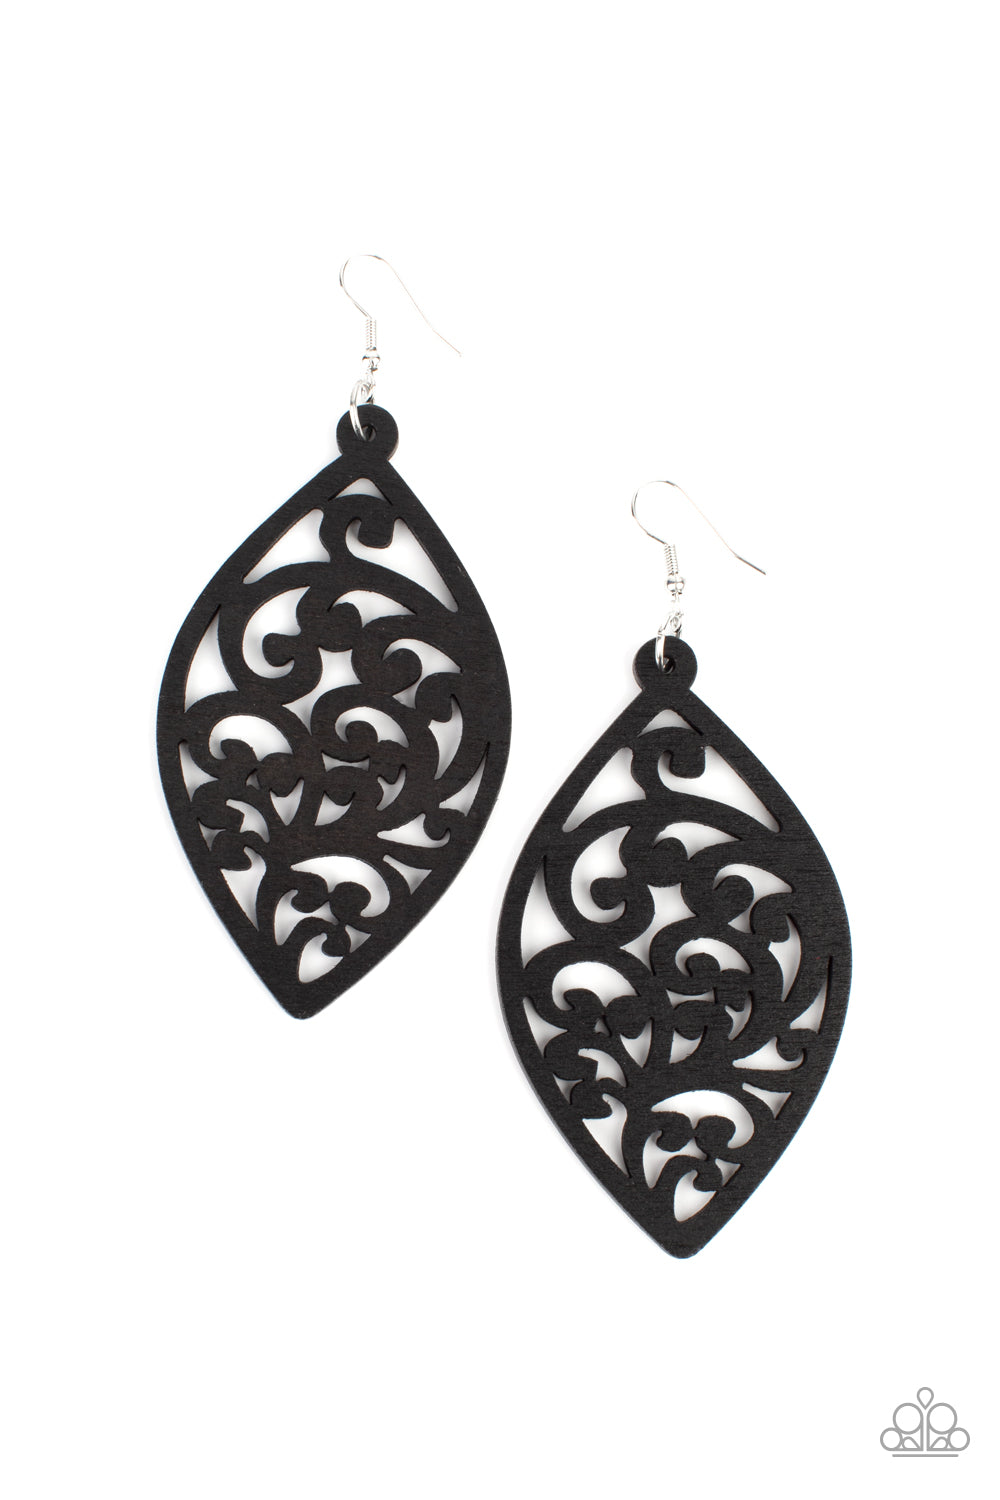 Coral Garden Black Wooden Earring - Paparazzi Accessories  Painted in a shiny black finish, a floral motif permeates an airy oval wooden frame creating a tropical-inspired lure. Earring attaches to a standard fishhook fitting.  Sold as one pair of earrings.